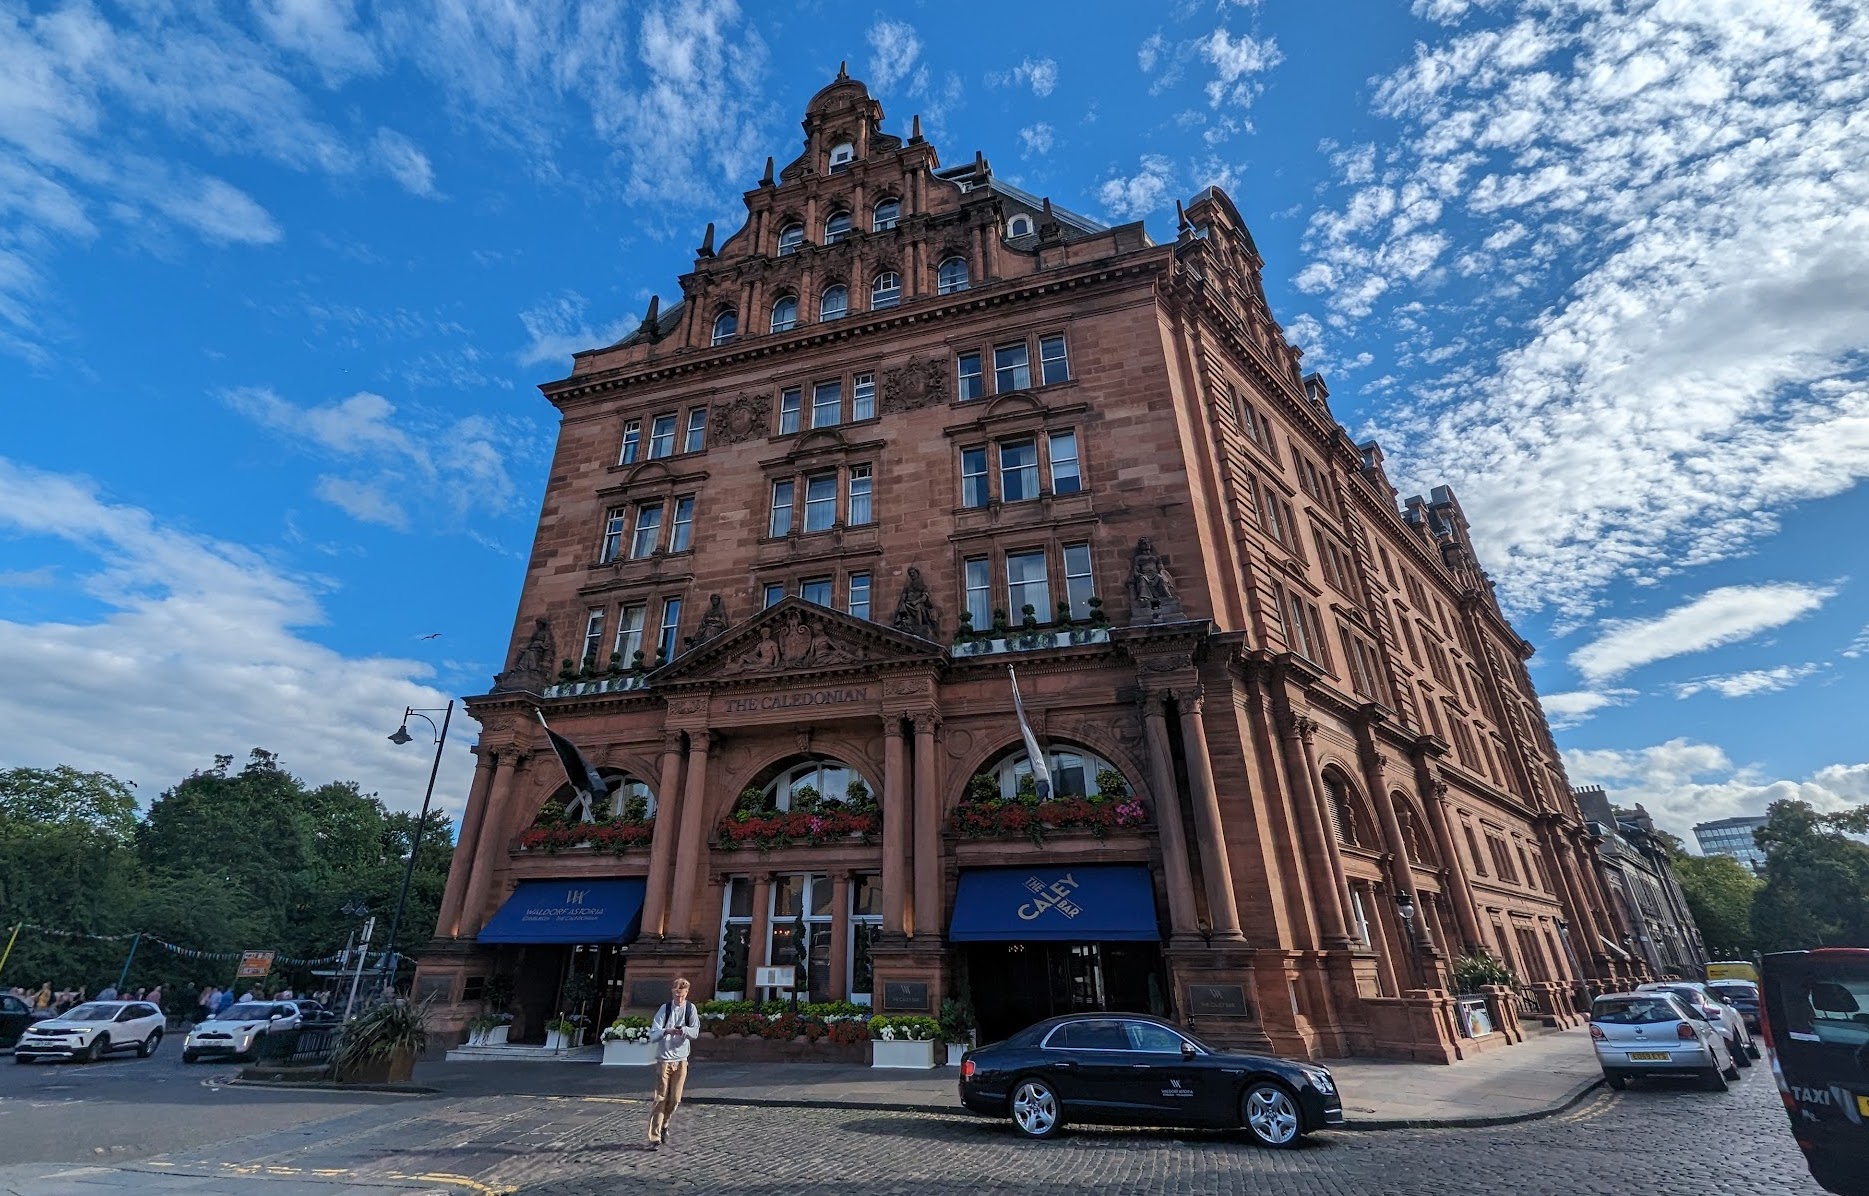 The Caledonian Hotel to undergo £35 million makeover